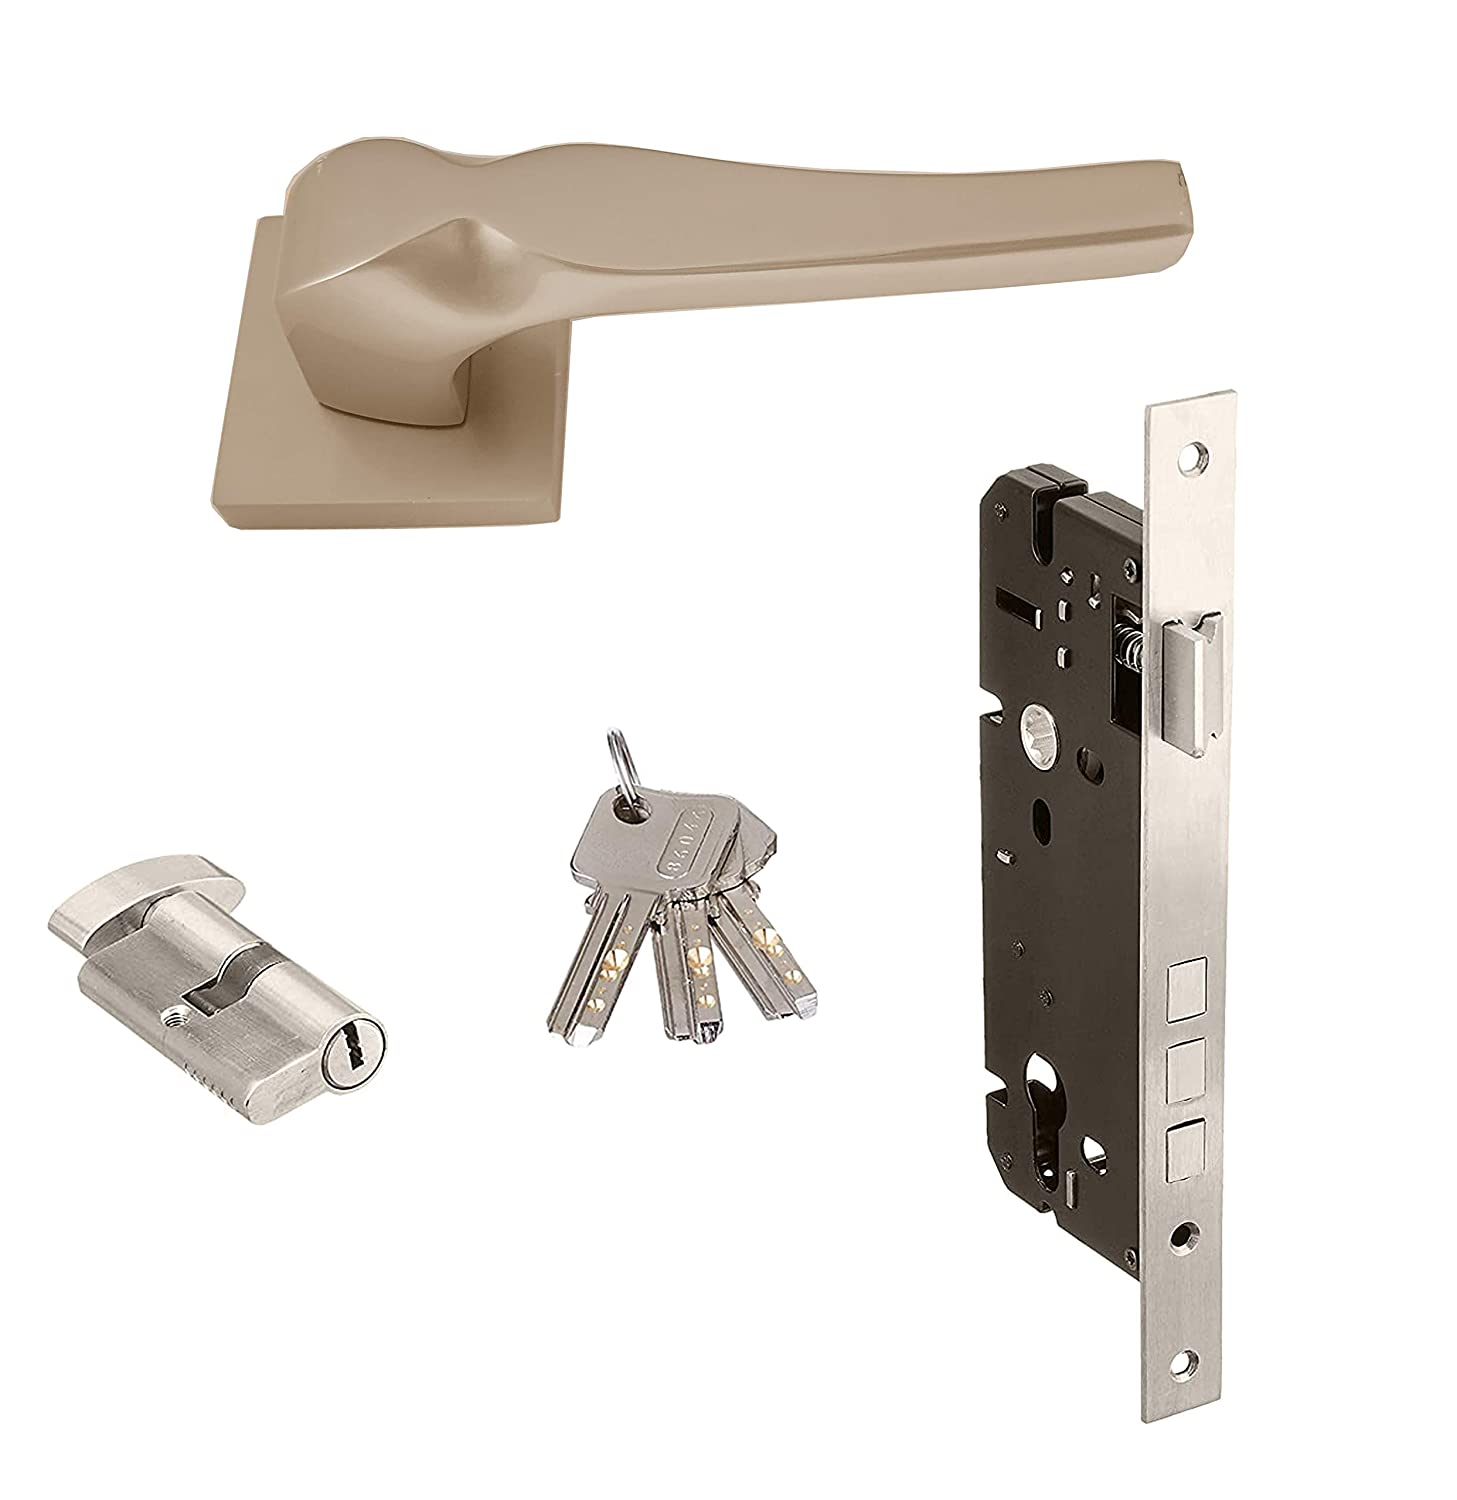 Aquieen MH-502 Malleable Mortise Handle Set wtih 2 Stage Cylindrical Lock & 5 Keys Complete Set (Chrome)